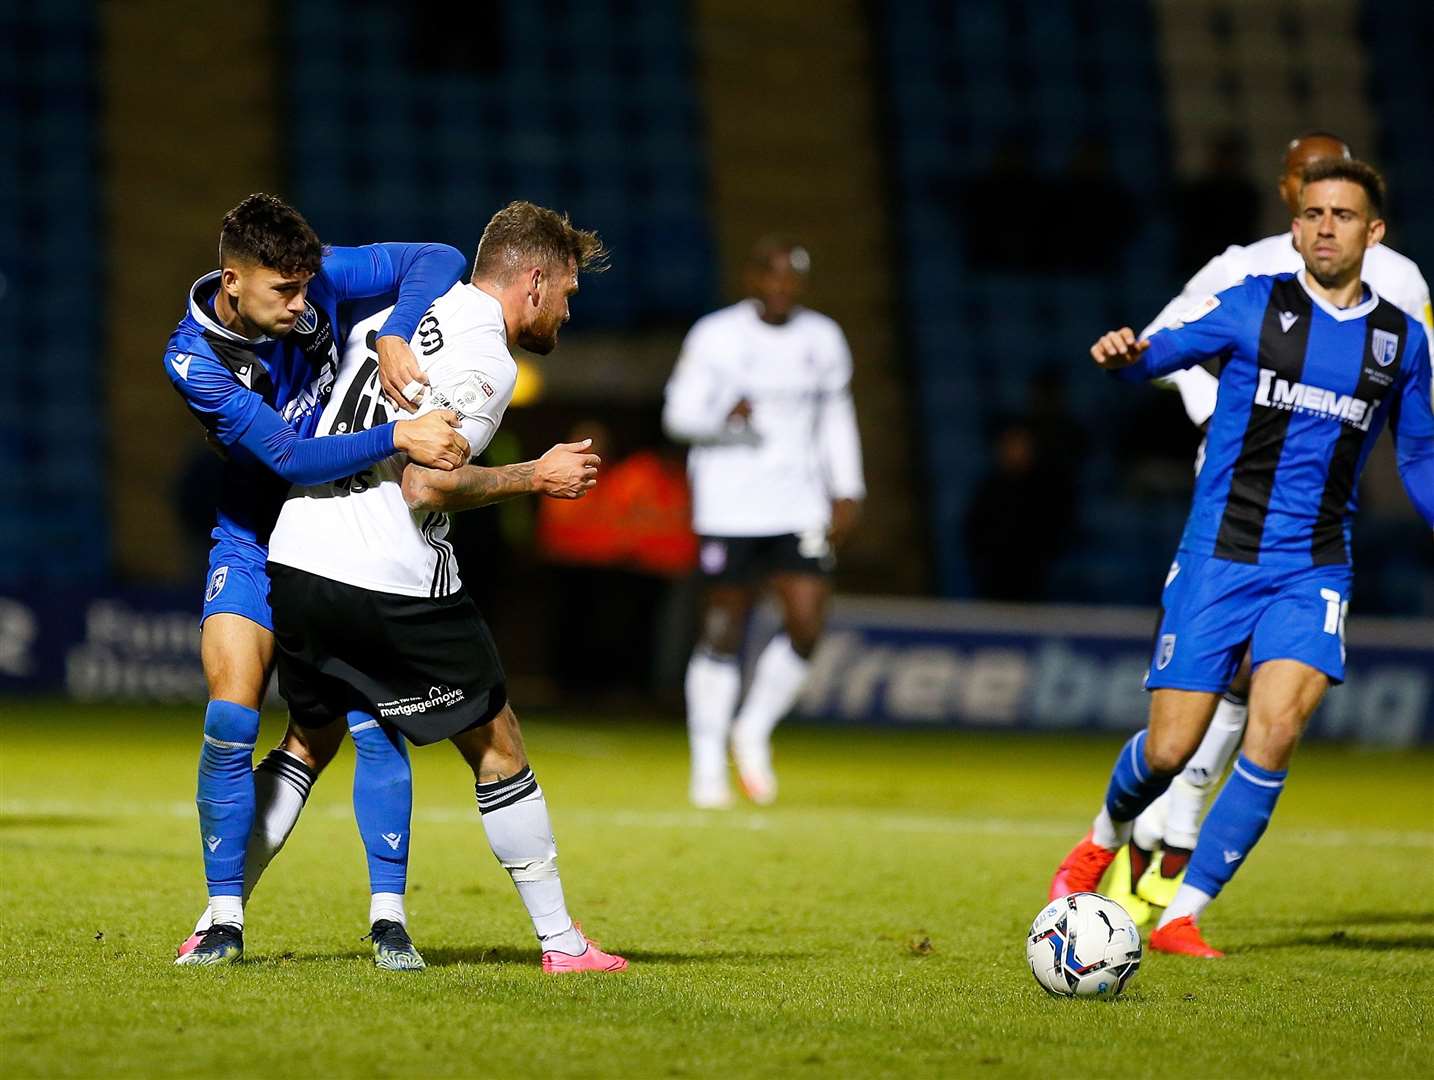 Young Gillingham defender Bailey Akehurst in the thick of the action against Ipswich Town Picture: Andy Jones